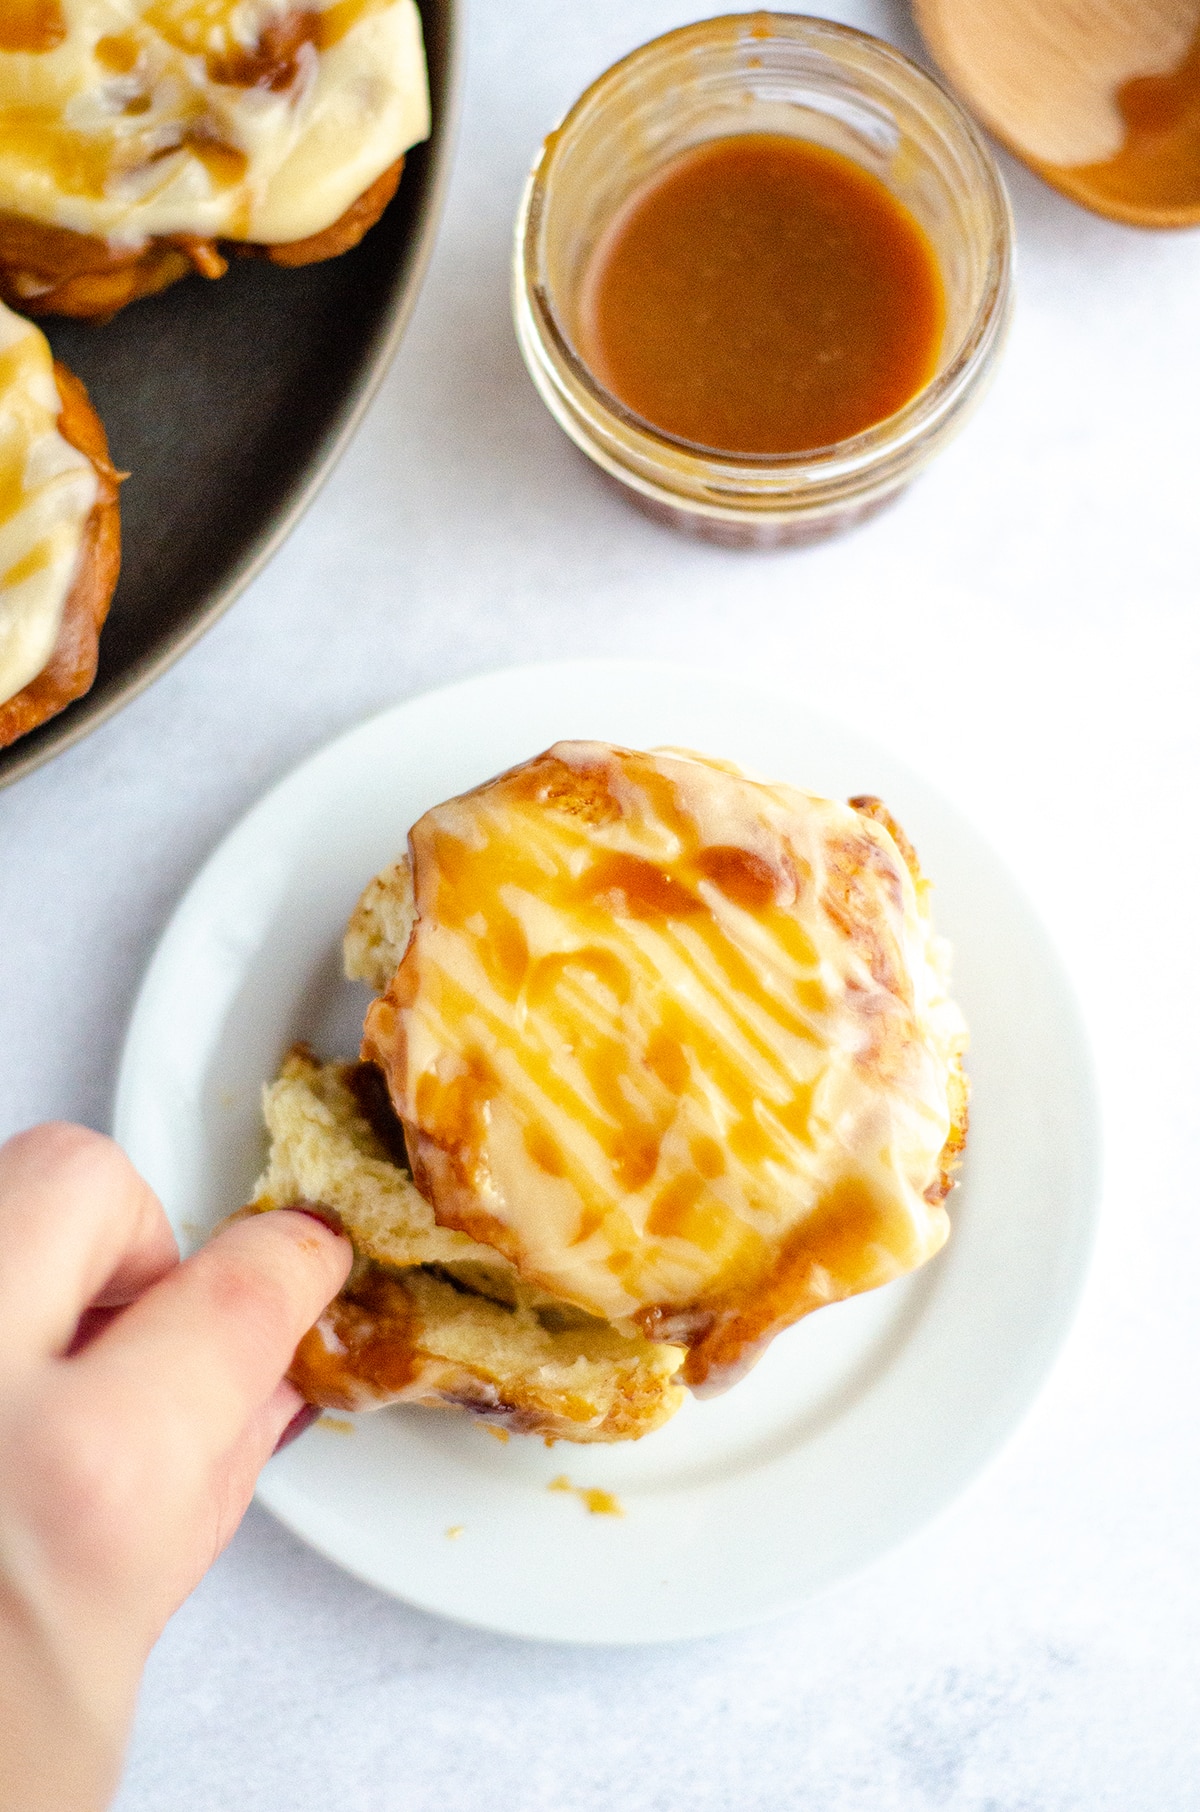 Caramel Rolls with Caramel Cream Cheese Icing: Easy small batch caramel cinnamon rolls drenched in salted caramel sauce and topped with a creamy salted caramel cream cheese frosting.